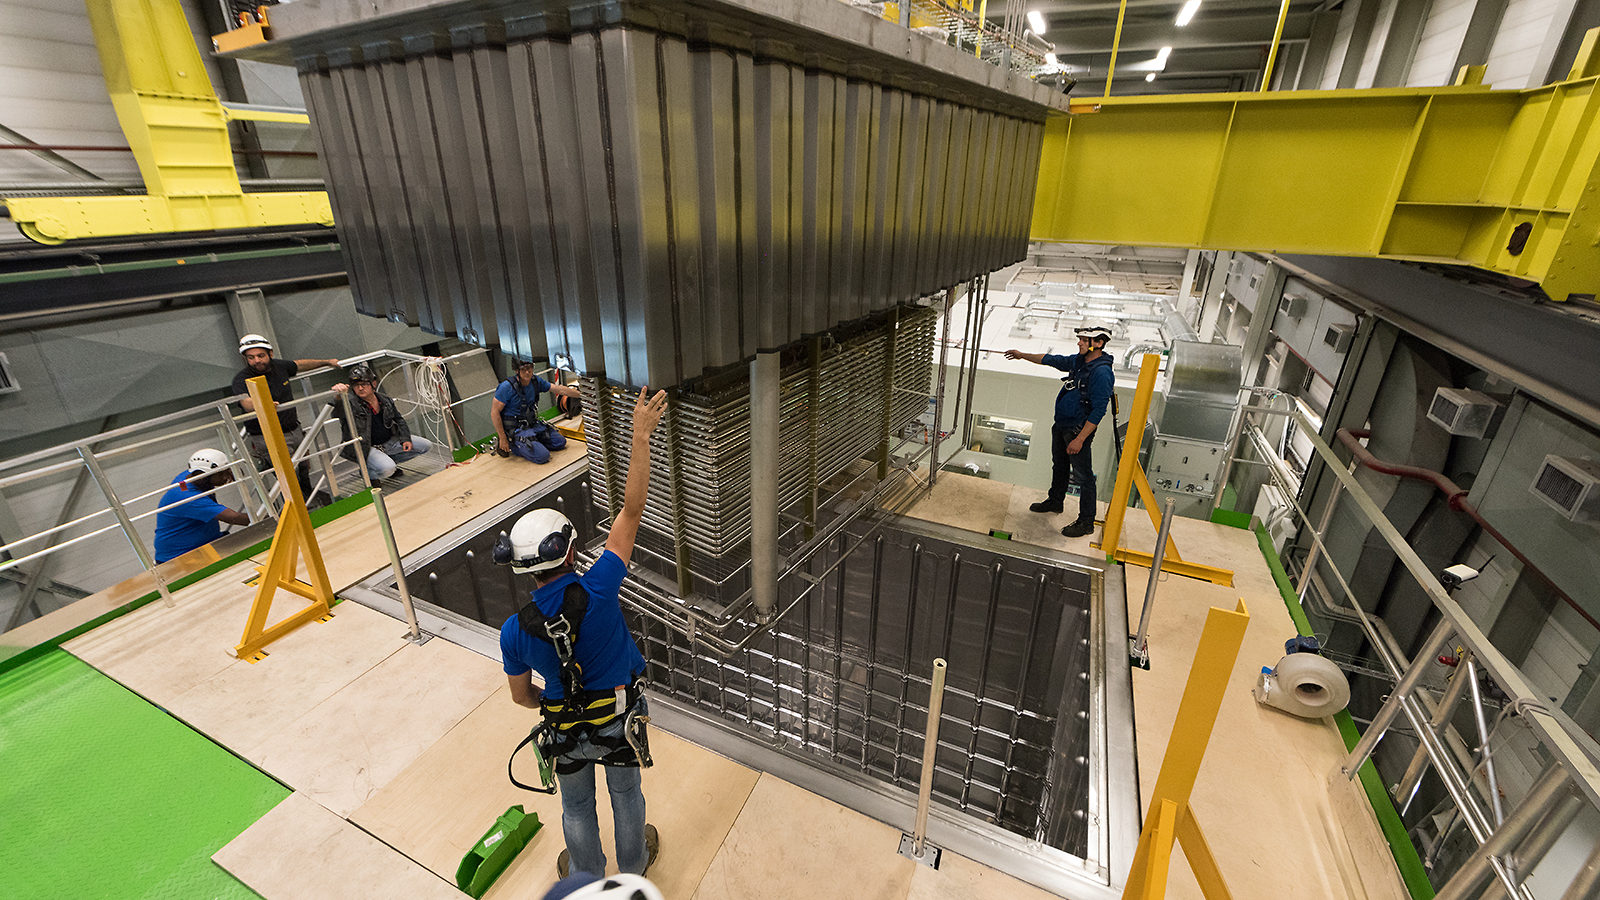 People in hard hats install the 311 detector